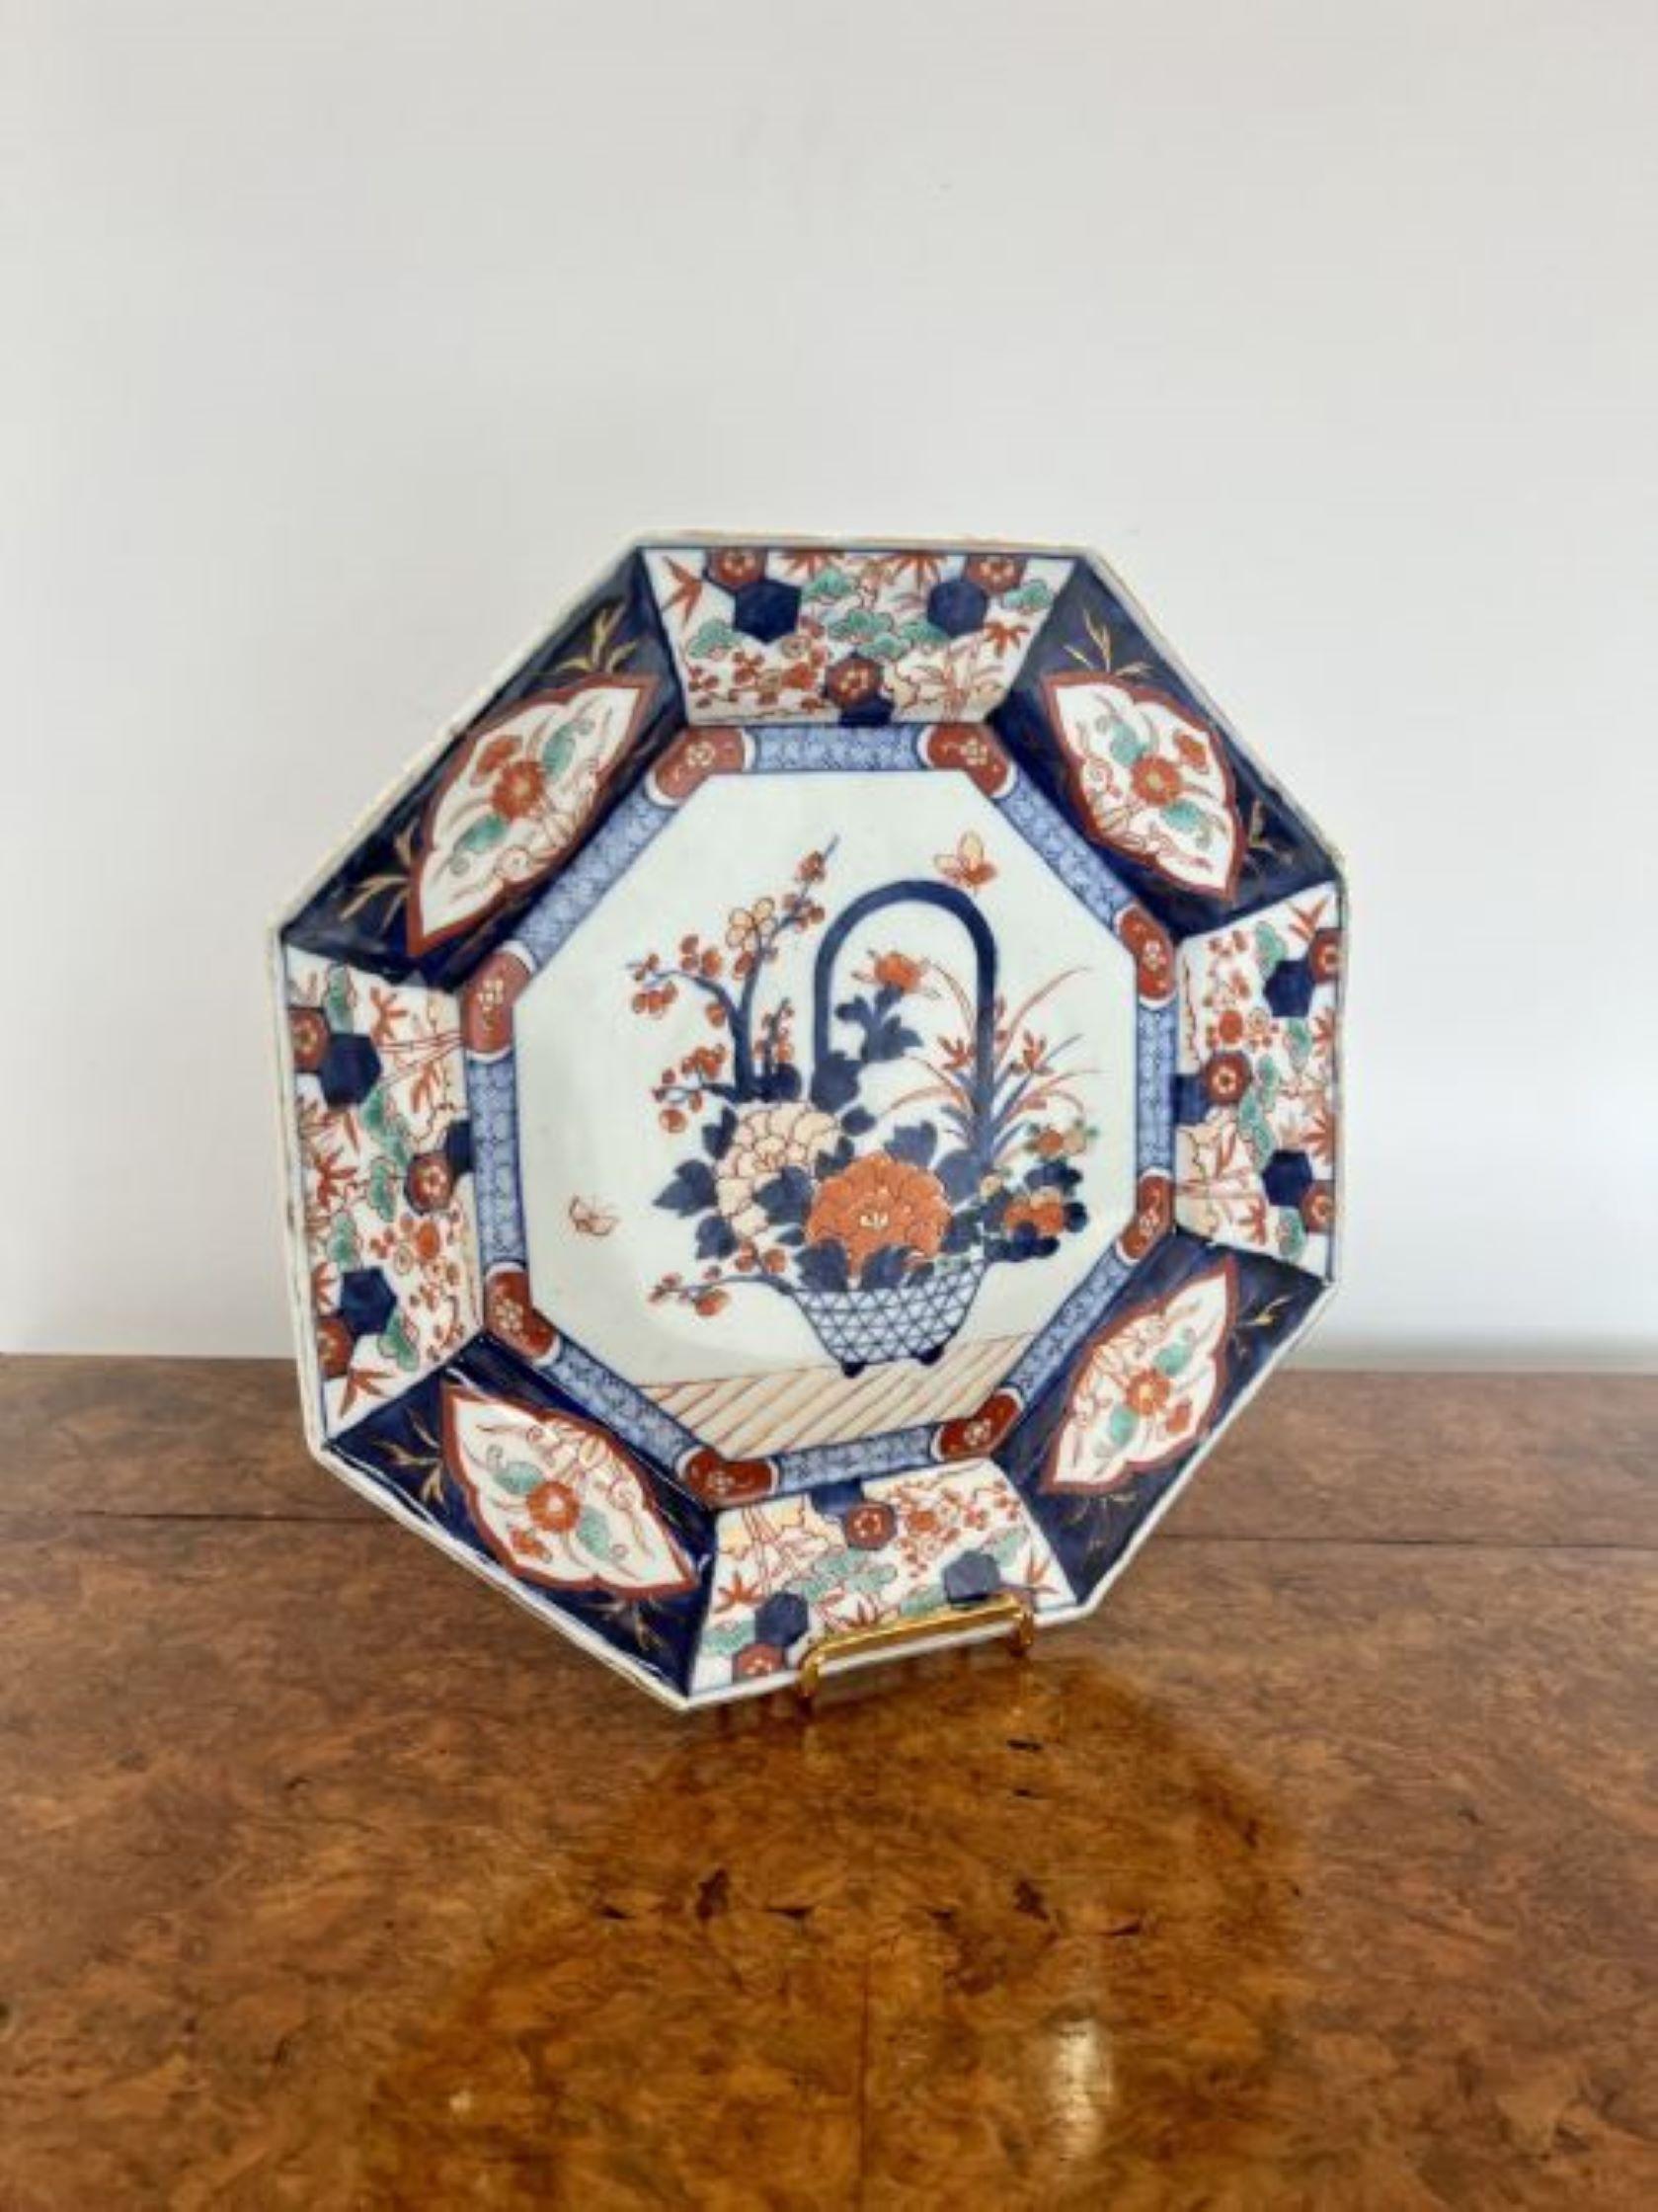 Unusual Shaped Antique Japanese Imari Plate In Good Condition For Sale In Ipswich, GB